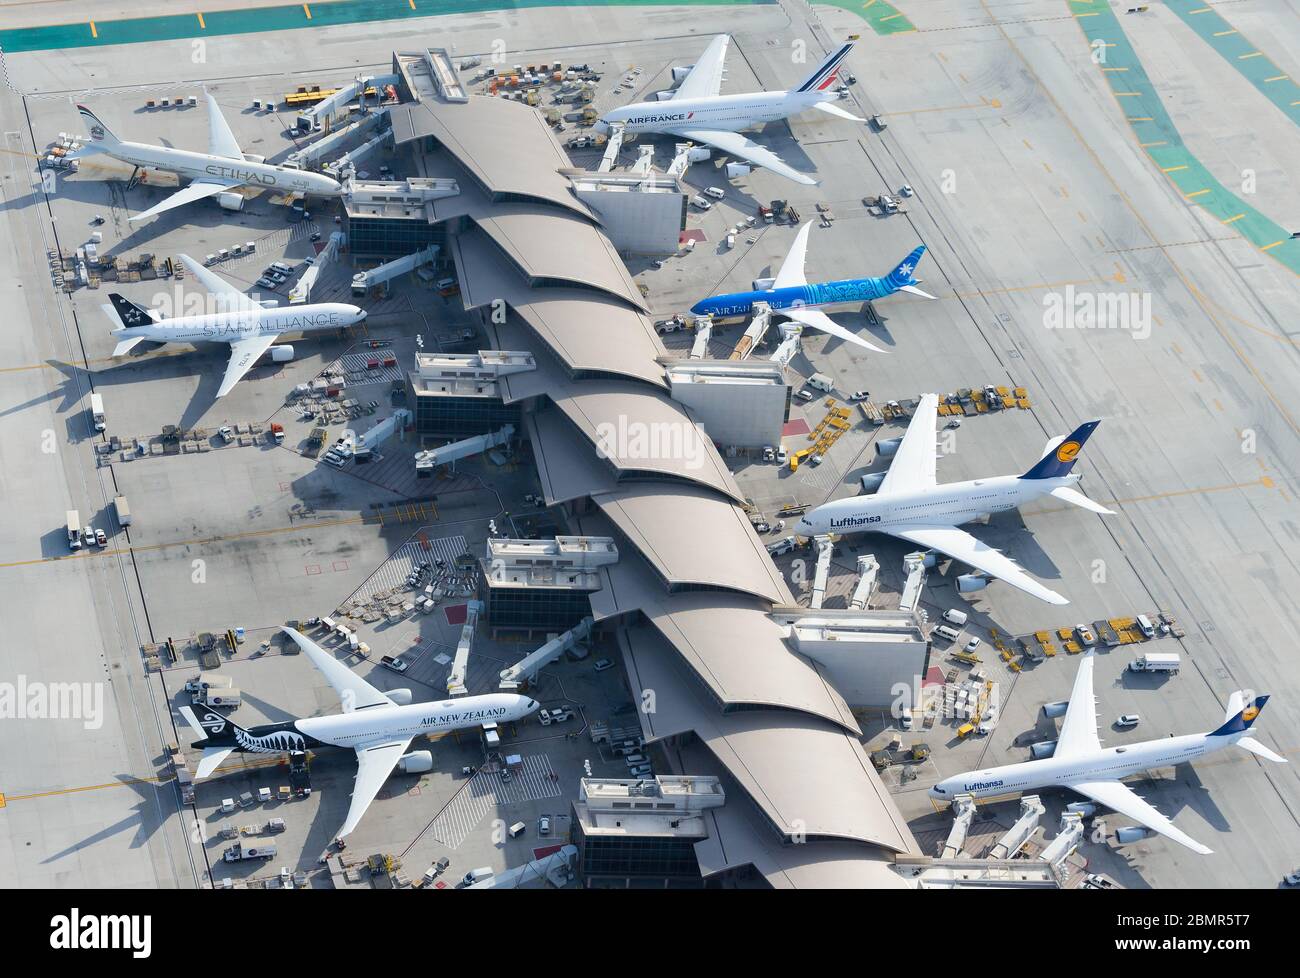 Aerial view of Tom Bradley International Terminal at Los Angeles Airport LAX, USA. Air travel demand in airport concourse seen from above. Stock Photo